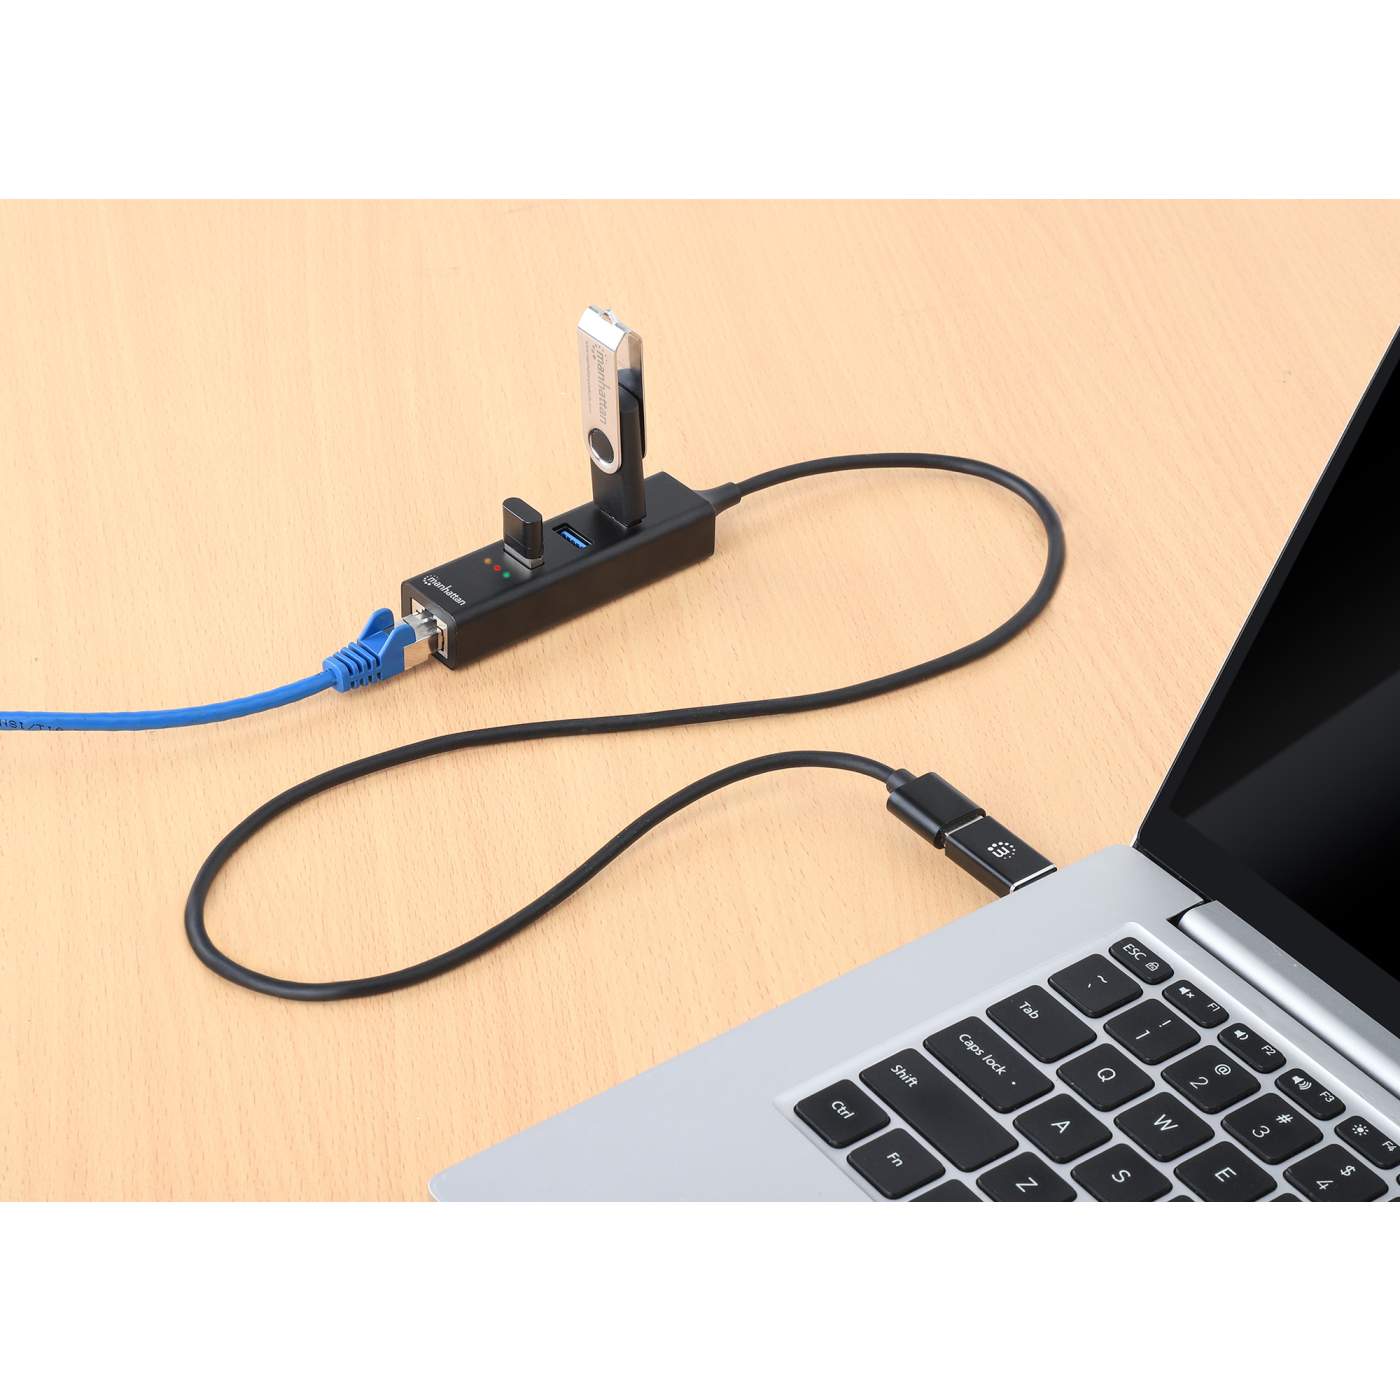 3-Port USB 3.0 Type-C/A Combo Hub with Gigabit Ethernet Network Adapter Image 7